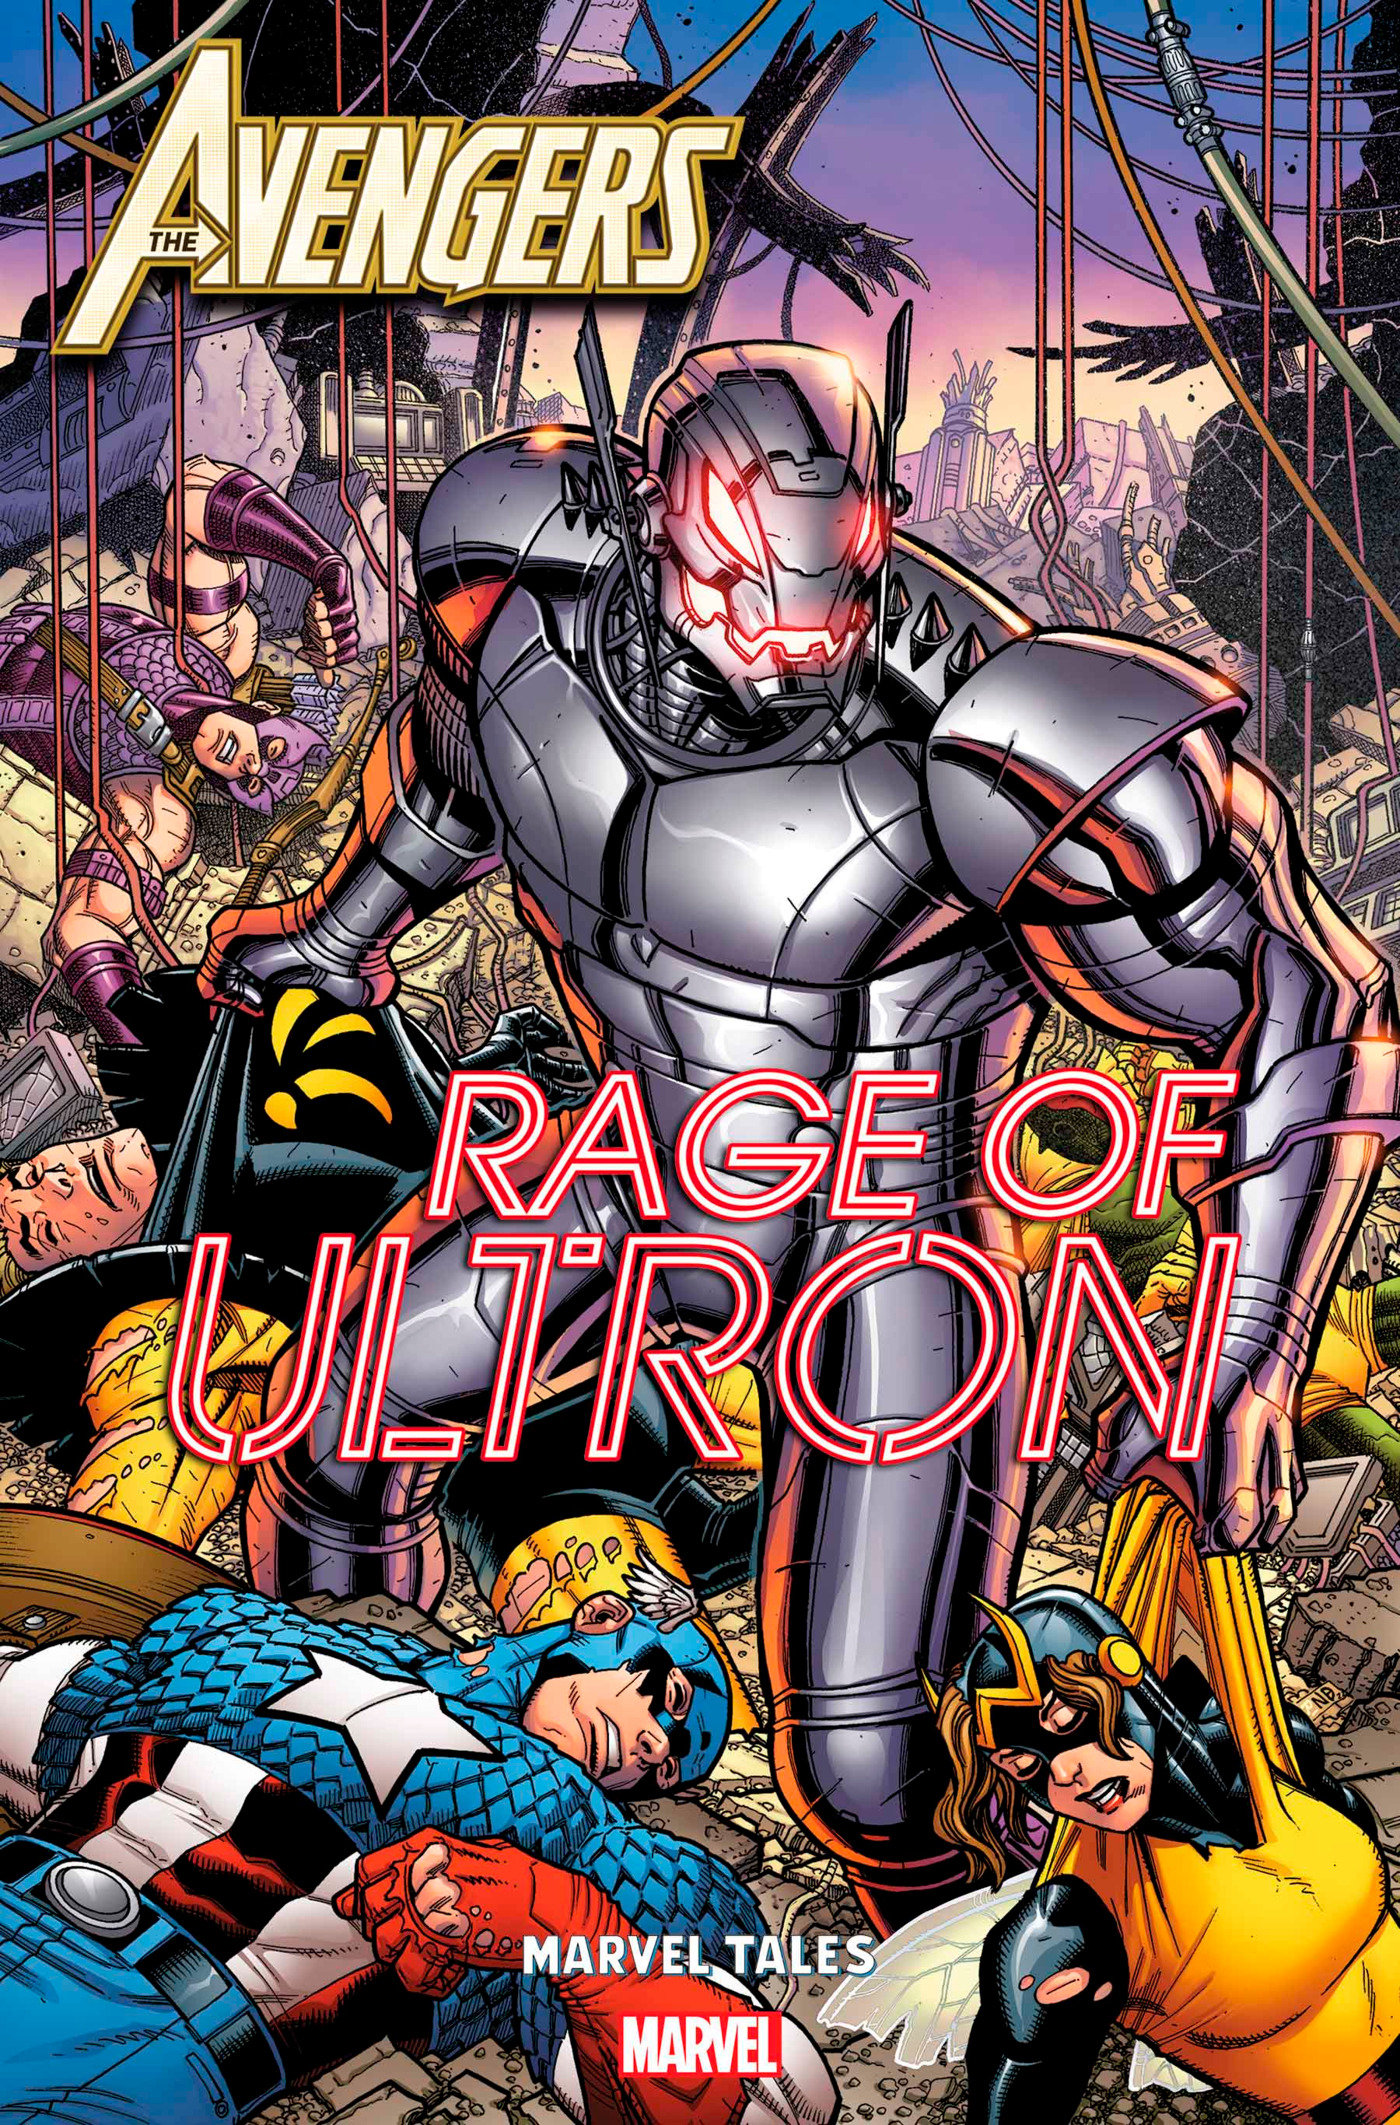 Avengers Rage of Ultron Marvel Tales #1